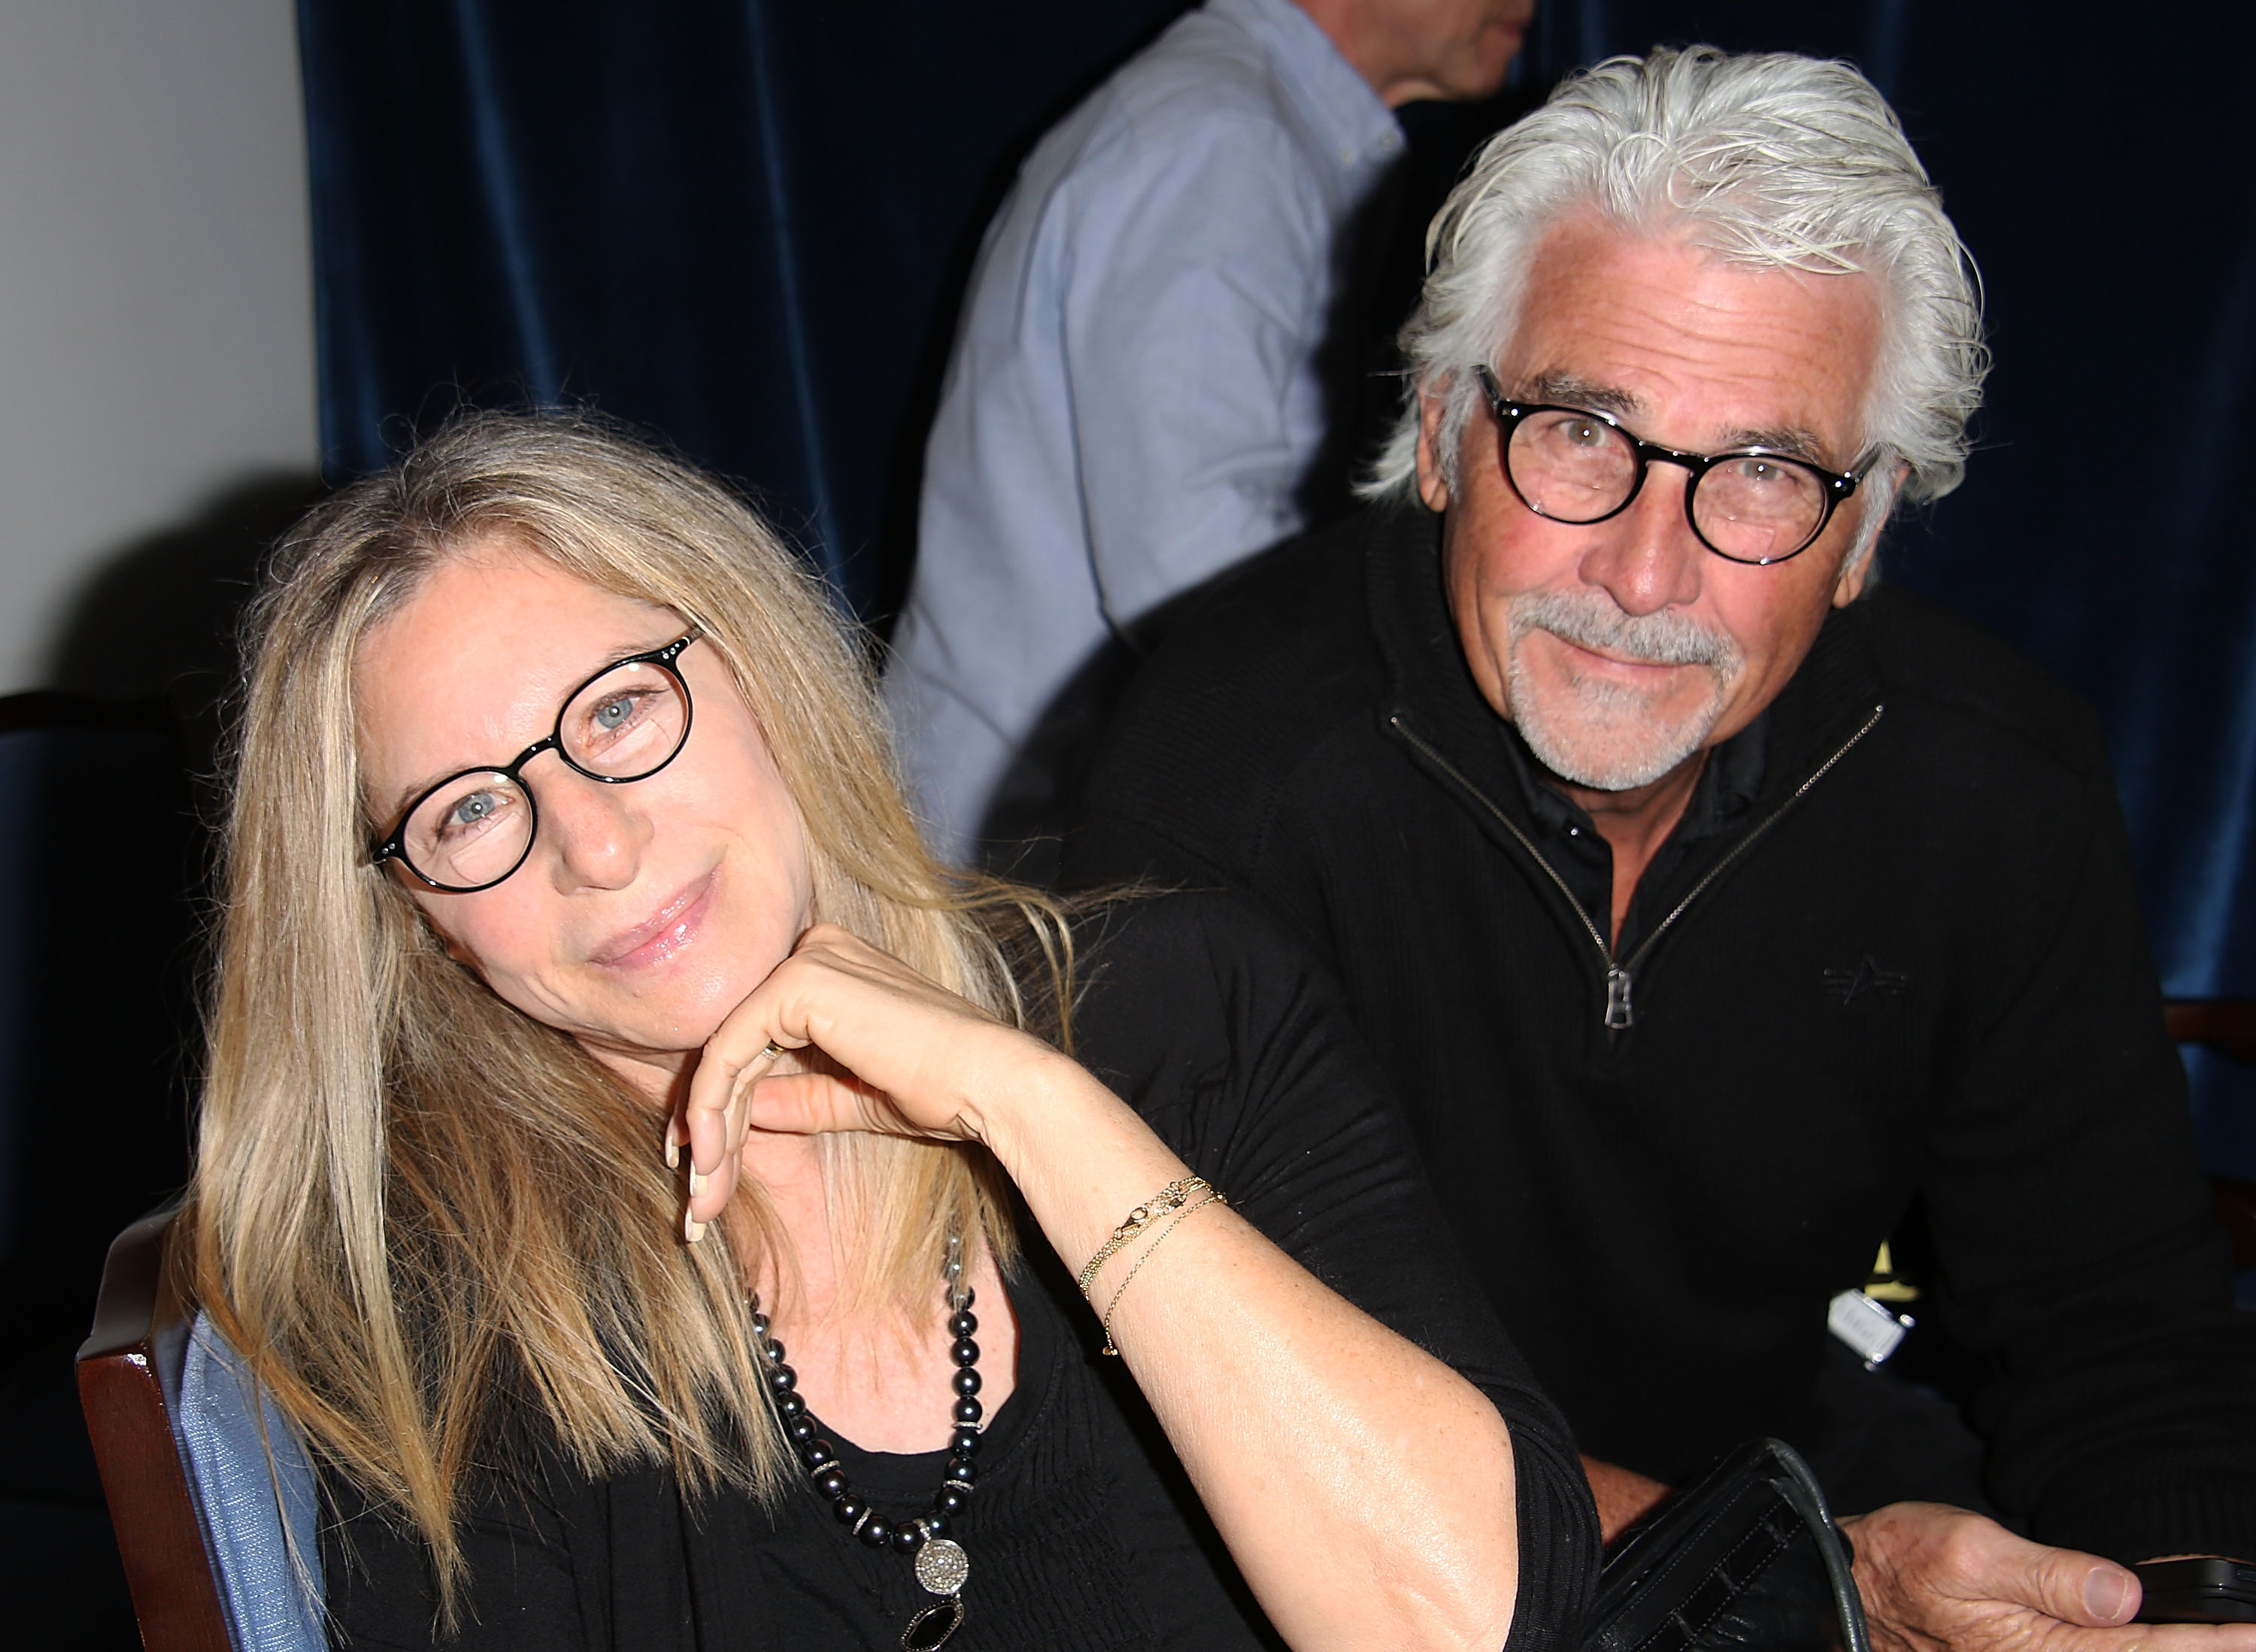 Barbra Streisand and James Brolin attend the "And So It Goes" premiere at Guild Hall on July 6, 2014, in East Hampton, New York. | Source: Getty Images